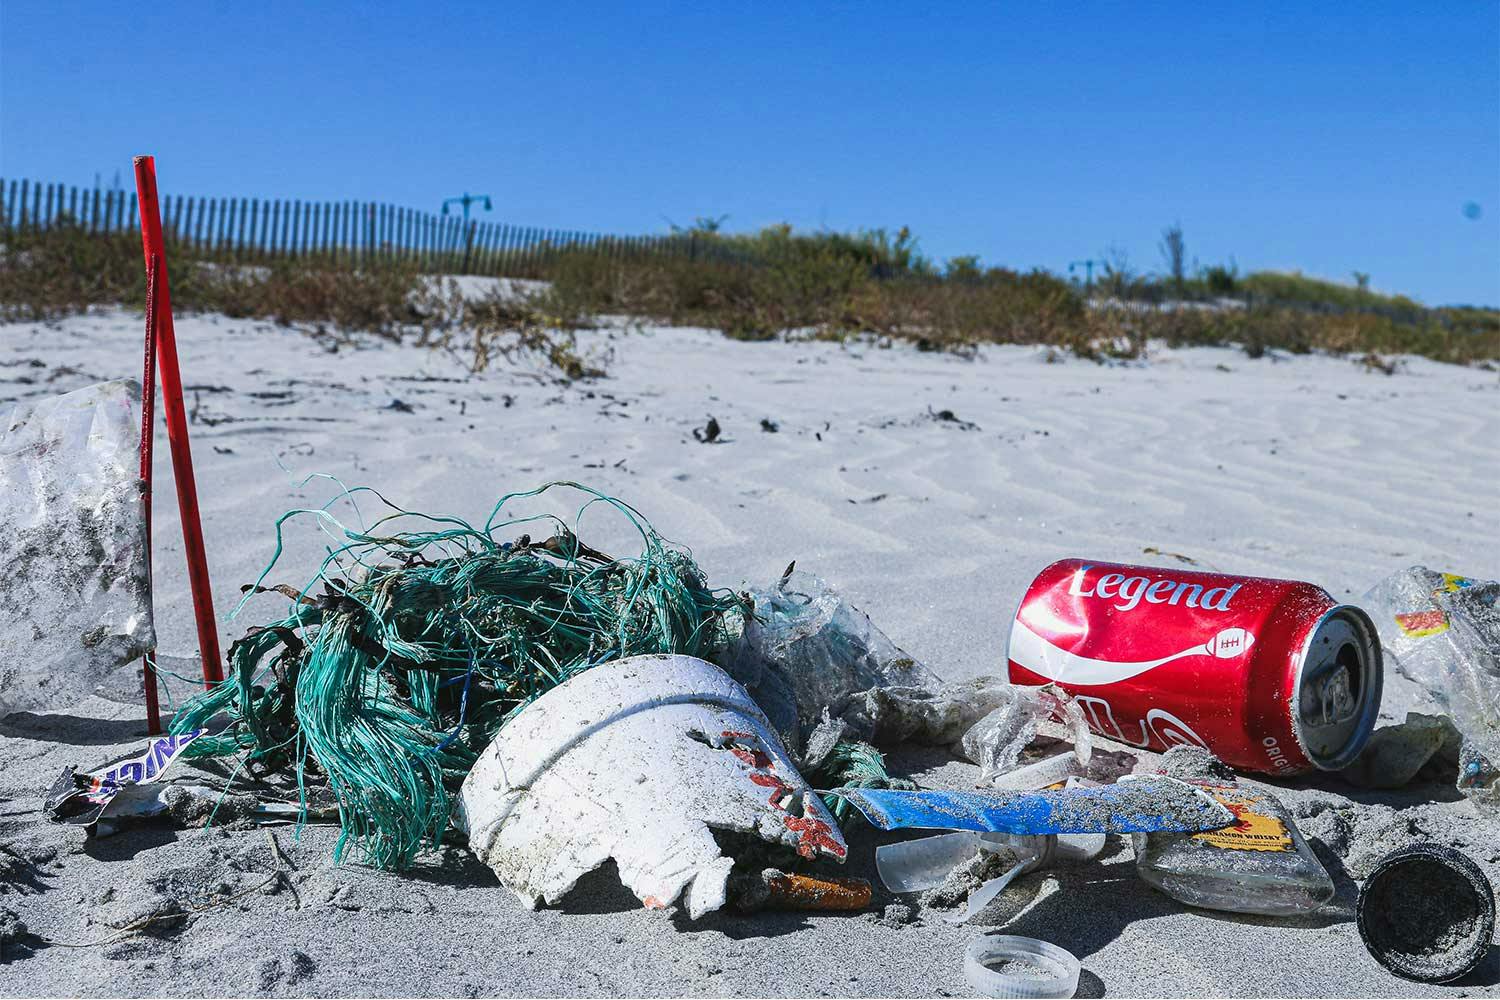 Blue fishing line, styrofoam, a coke can, candy wrappers, and other garbage washed up on a sandy beach.